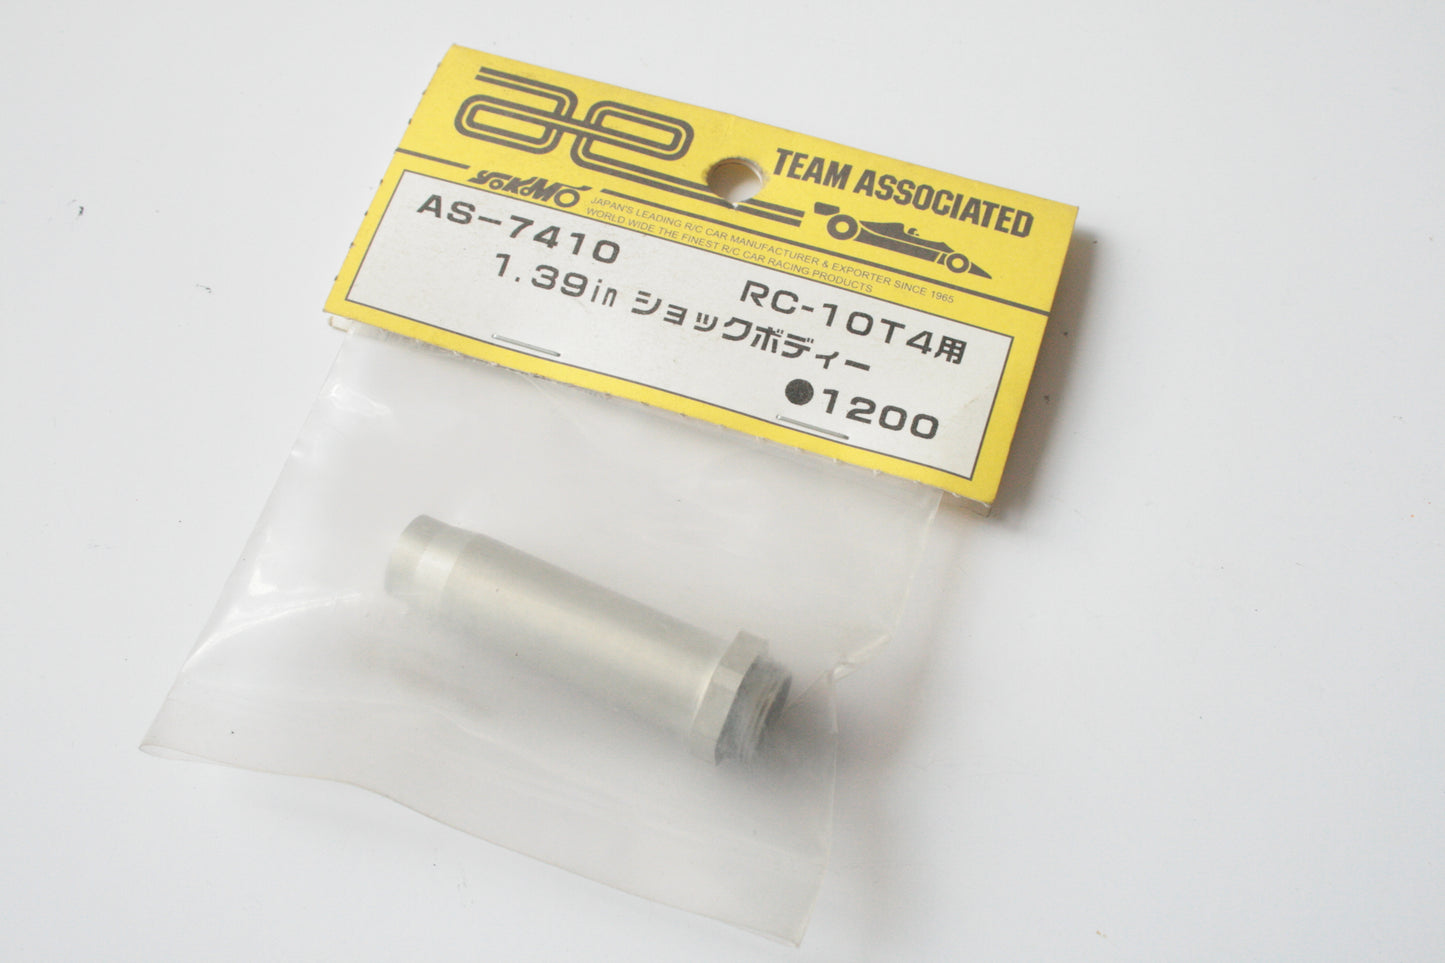 Associated RC10 T4 1.39" Hard Anodized Shock Body - AS 7410 T3 T2